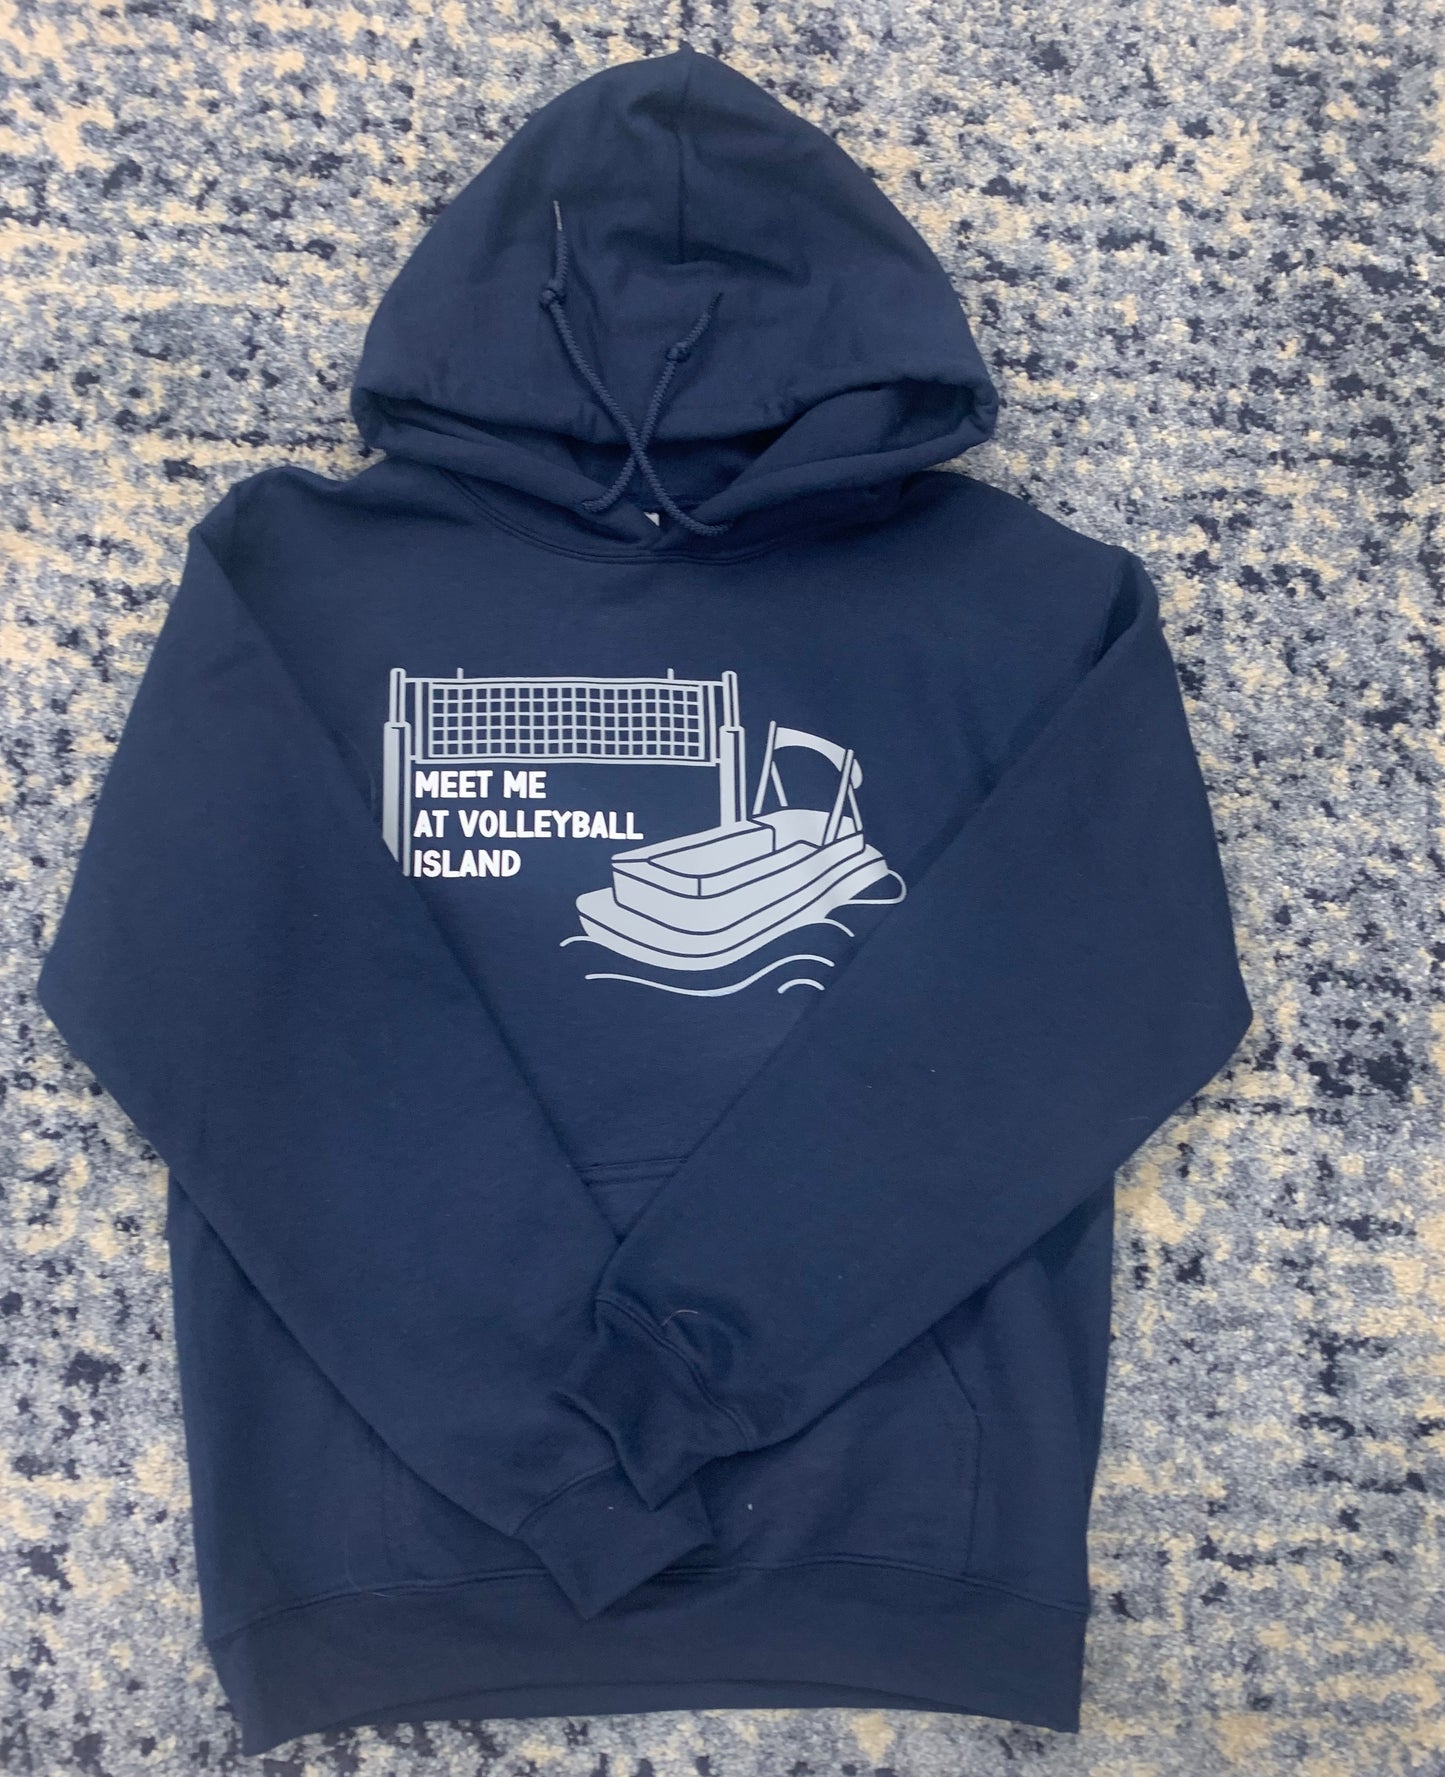 Meet Me at Volleyball Island Hoodie